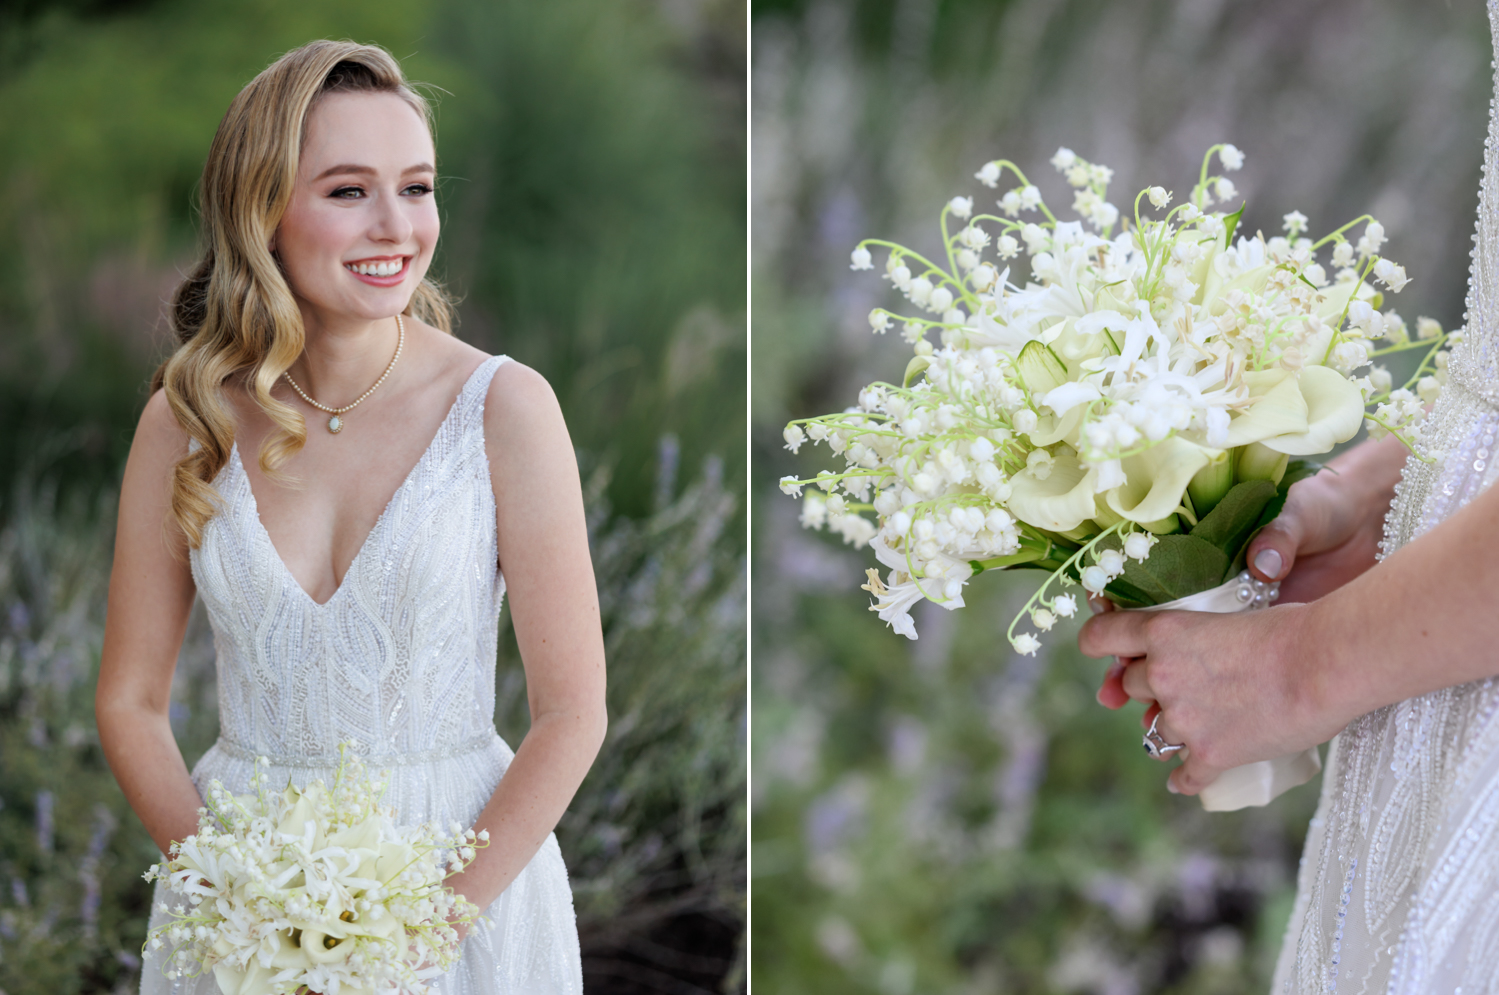 Left: The bride laughs, holding her bouquet. Right: A close up shot of the bouquet from the side. It's small with wispy white flowers.